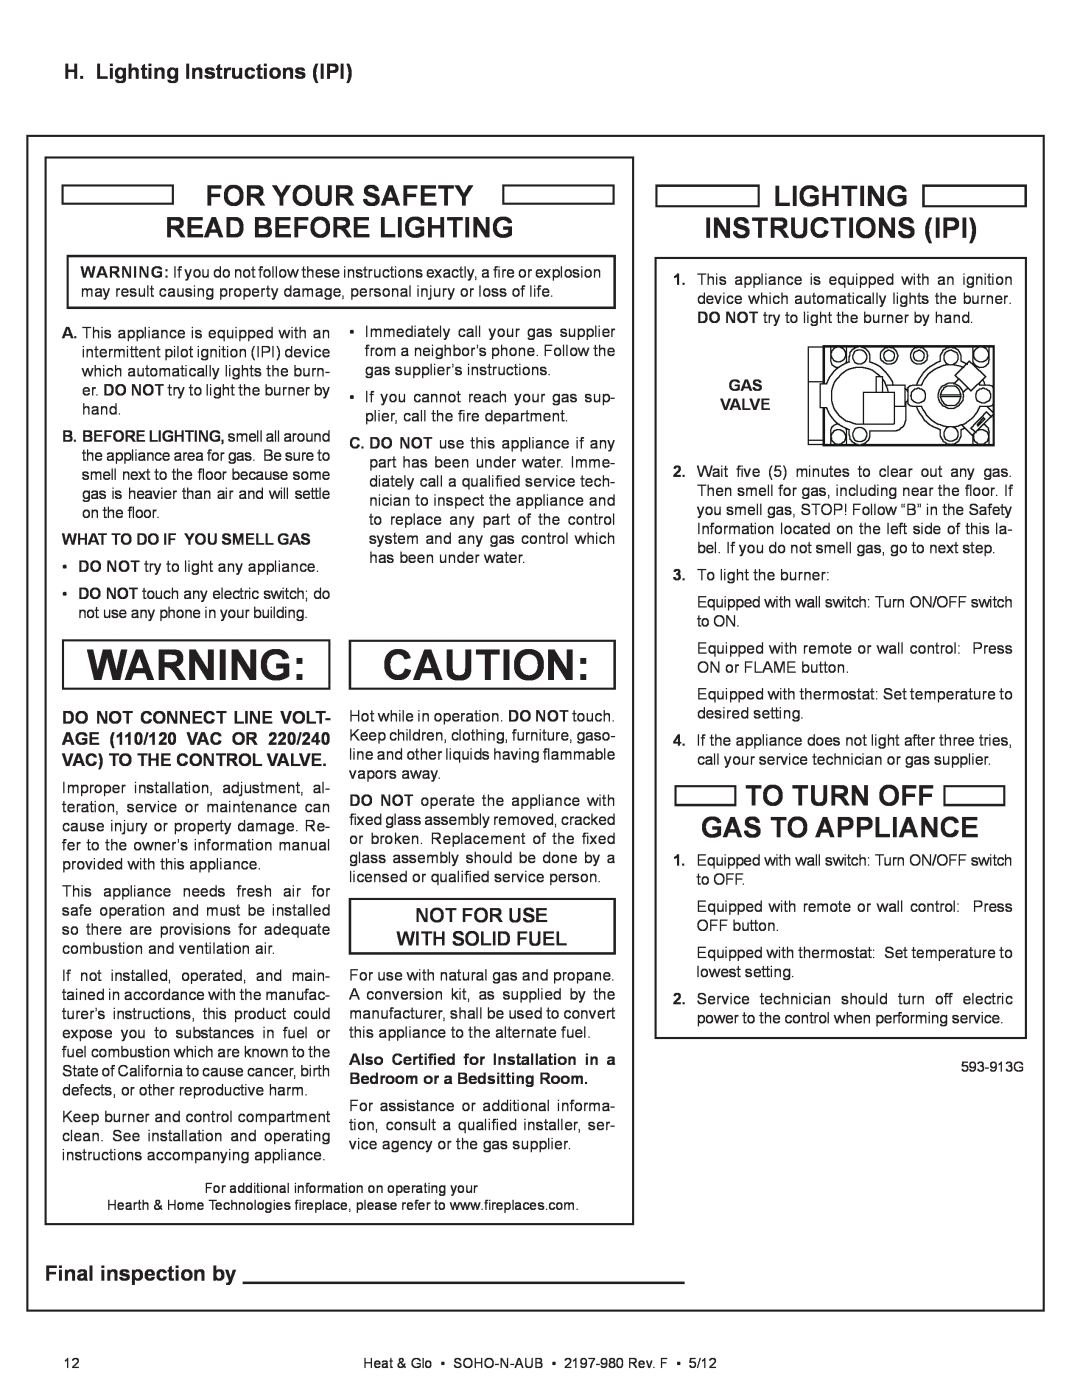 Heat & Glo LifeStyle 2197-980 For Your Safety Read Before Lighting, Lighting Instructions Ipi, Final inspection by 